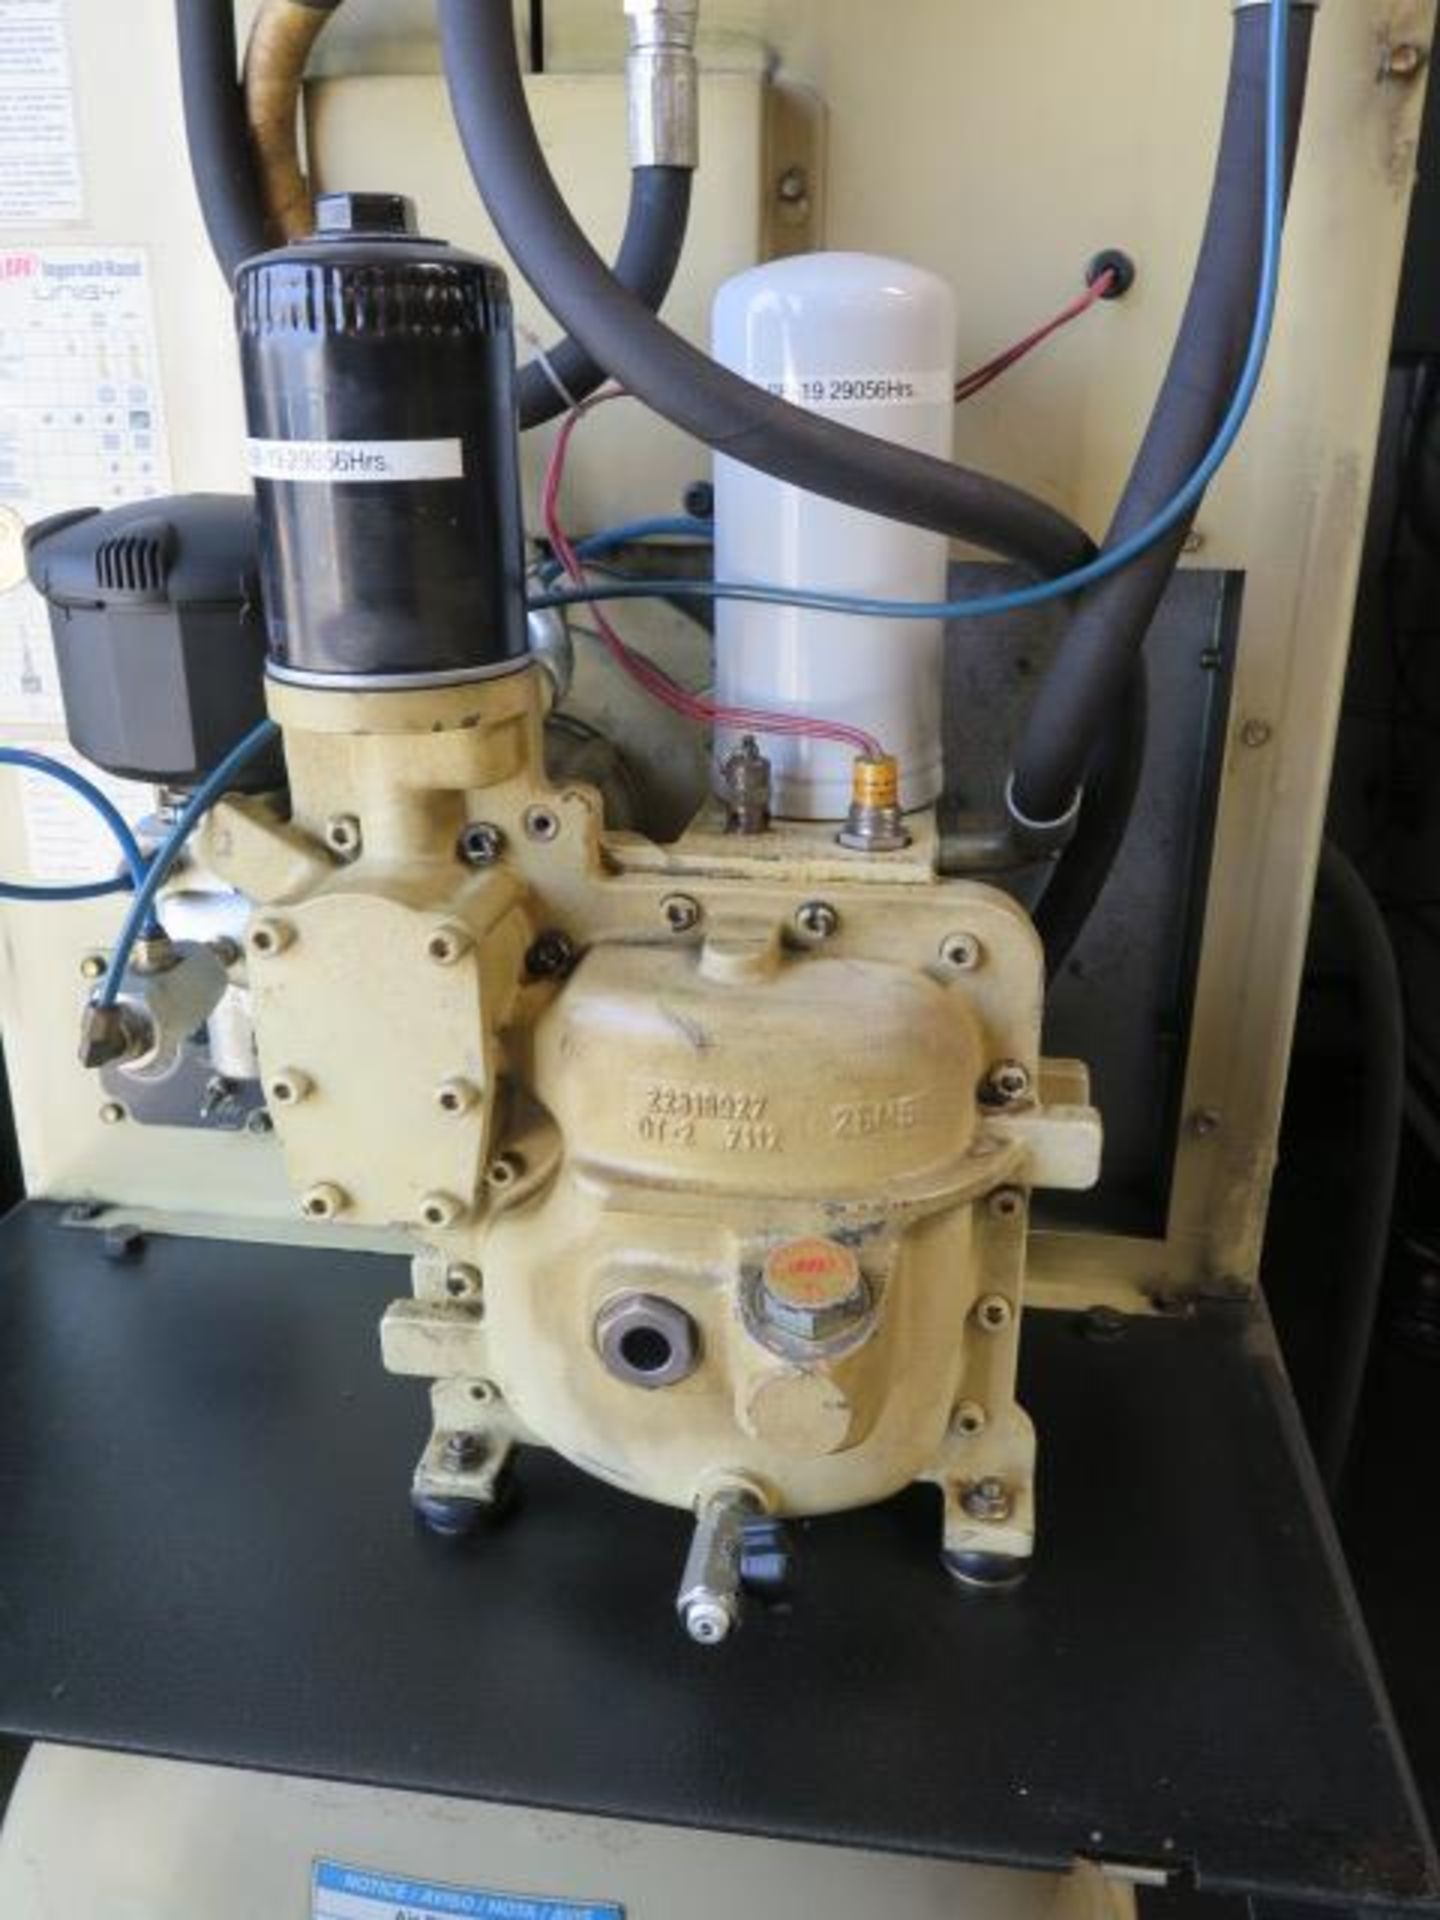 Ingersoll Rand mdl. UNI-7-115-L 7Hp Rotary Air Compressor s/n UE0771U06053 w/ 80 Gallon, SOLD AS IS - Image 6 of 7